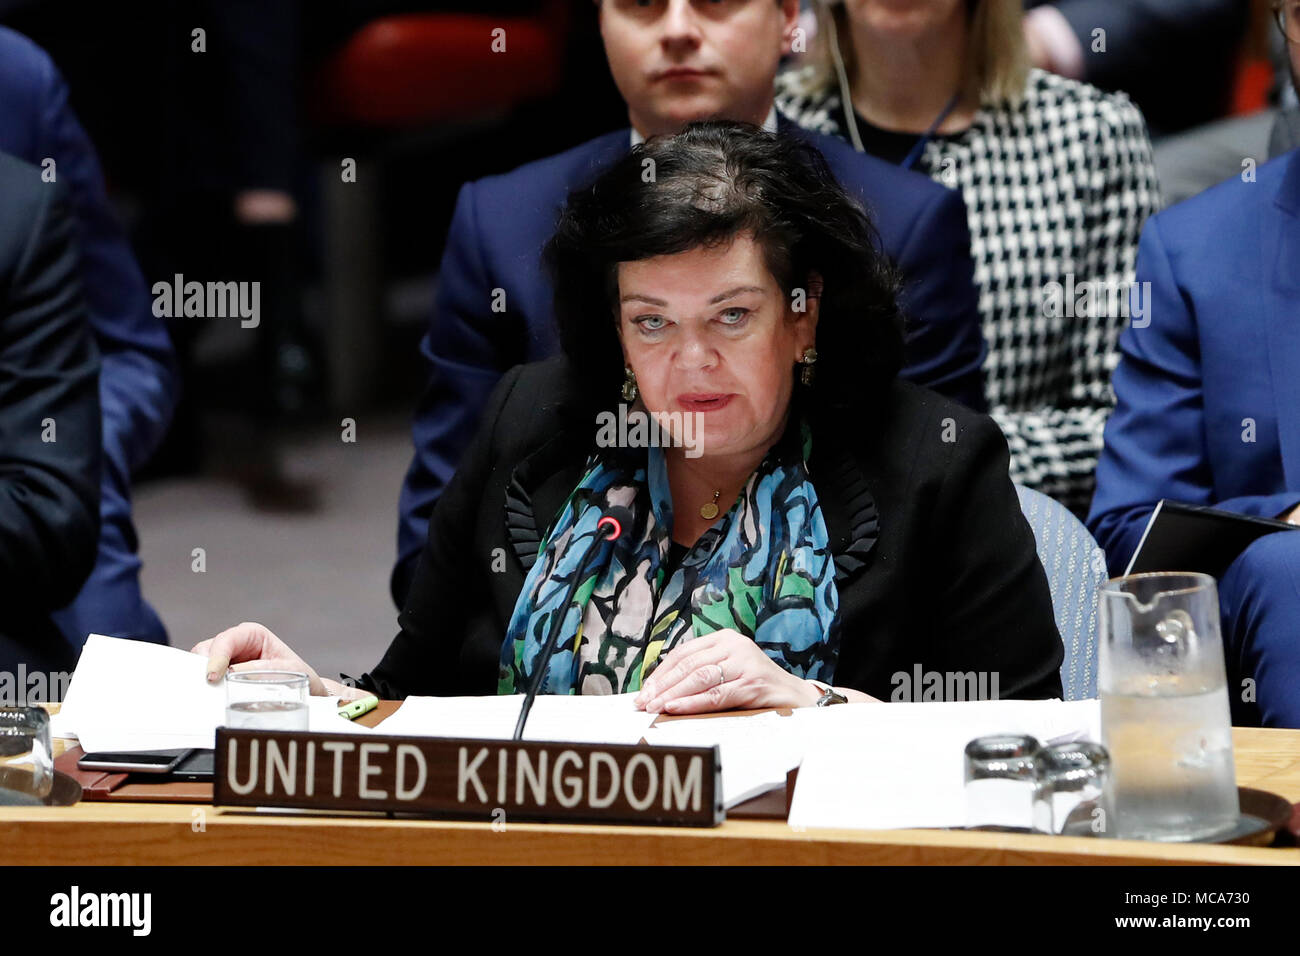 Untied Nations. 14th Apr, 2018. British Ambassador to the United Nations Karen Pierce (Front) addresses a Security Council emergency meeting on Syria at the UN headquarters in New York, April 14, 2018. UN Security Council held an emergency meeting on Syria requested by Russia on Saturday. UN Secretary-General Antonio Guterres expressed concern over Friday's joint military action against Syria by the United States, France and Britain, and called for adherence to the UN Charter and international law on the issue. Credit: Li Muzi/Xinhua/Alamy Live News Stock Photo